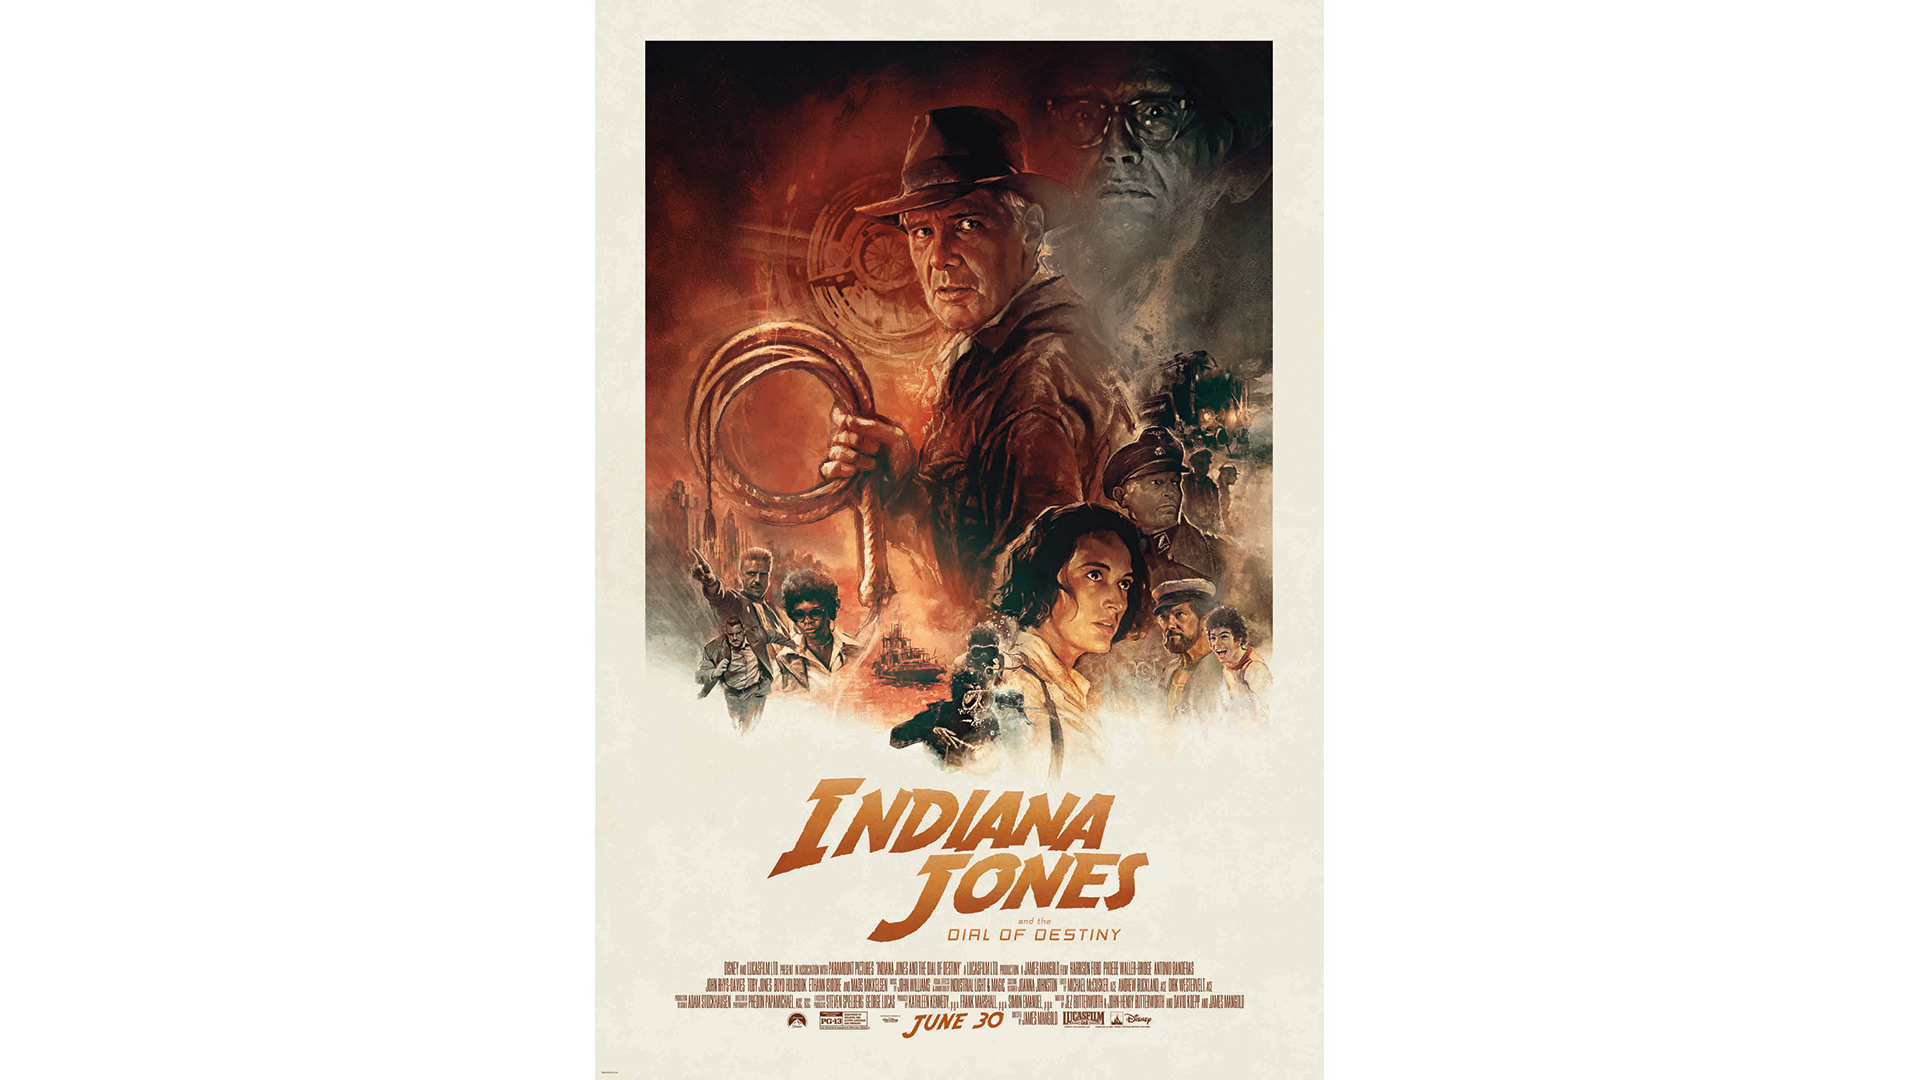 Indiana Jones and the Dial of Destiny Payoff Poster